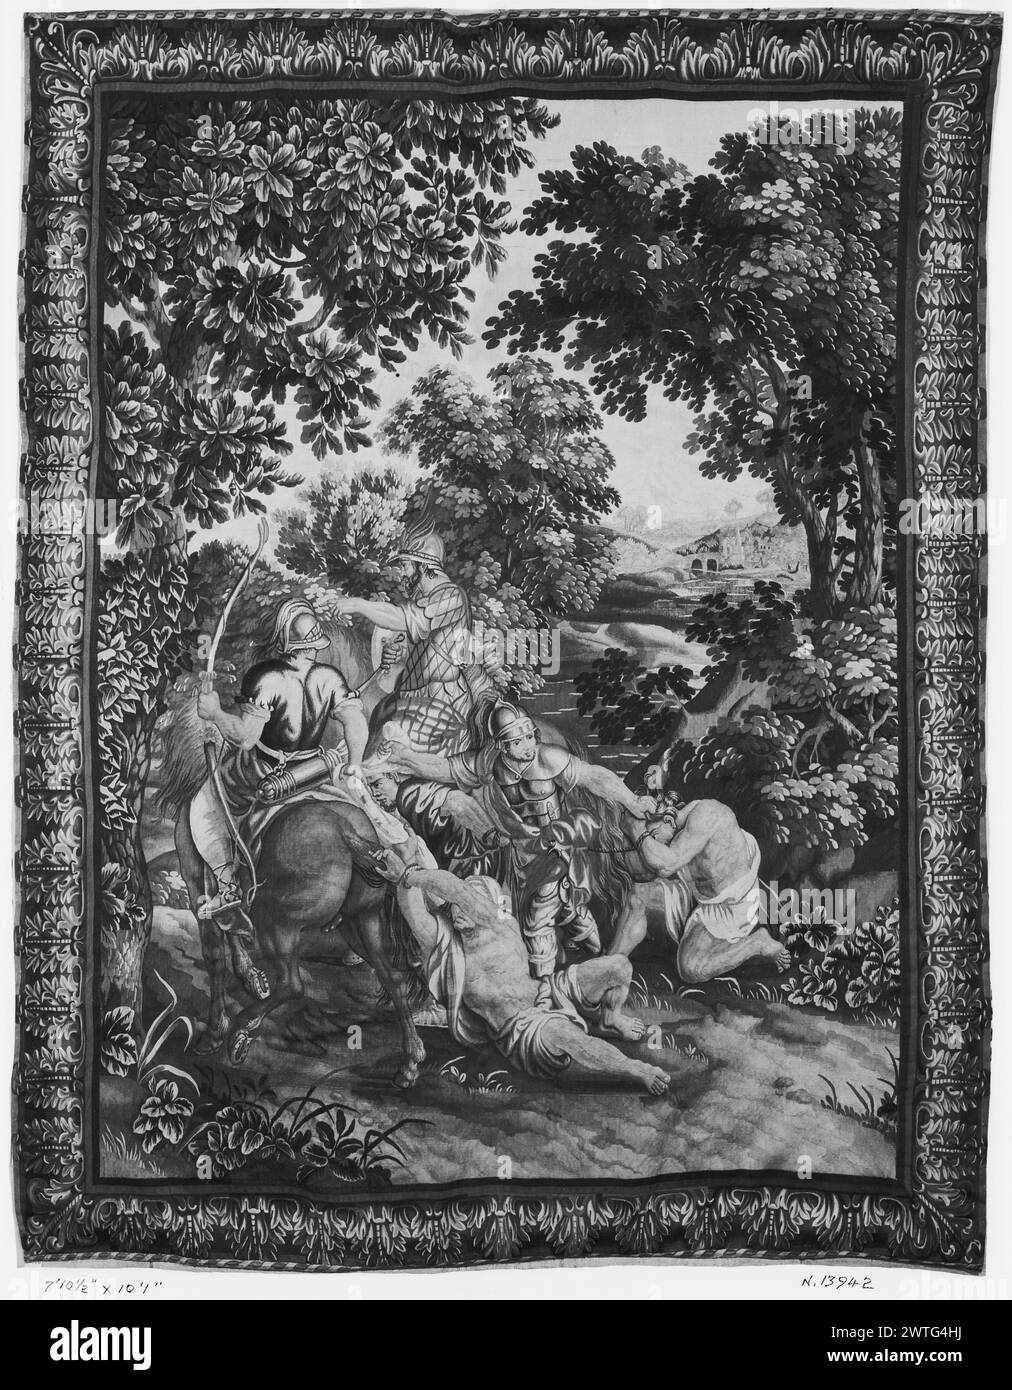 King Porus brought before Alexander . Le Brun, Charles (French, 1619-1690) (designed after) [painter] c. 1700-1725 Tapestry Dimensions: H 10'1' x W 7'10.5' Tapestry Materials/Techniques: unknown Culture: Flemish Weaving Center: unknown Ownership History: French & Co. Alexander accompanied by 2 soldiers, on foot & on horseback, drag 3 prisoners with bound wrists (BRD) abstracted acanthus-leaf motif Group from the lower left 1/3 foreground of complete composition; also reversed. Stock Photo